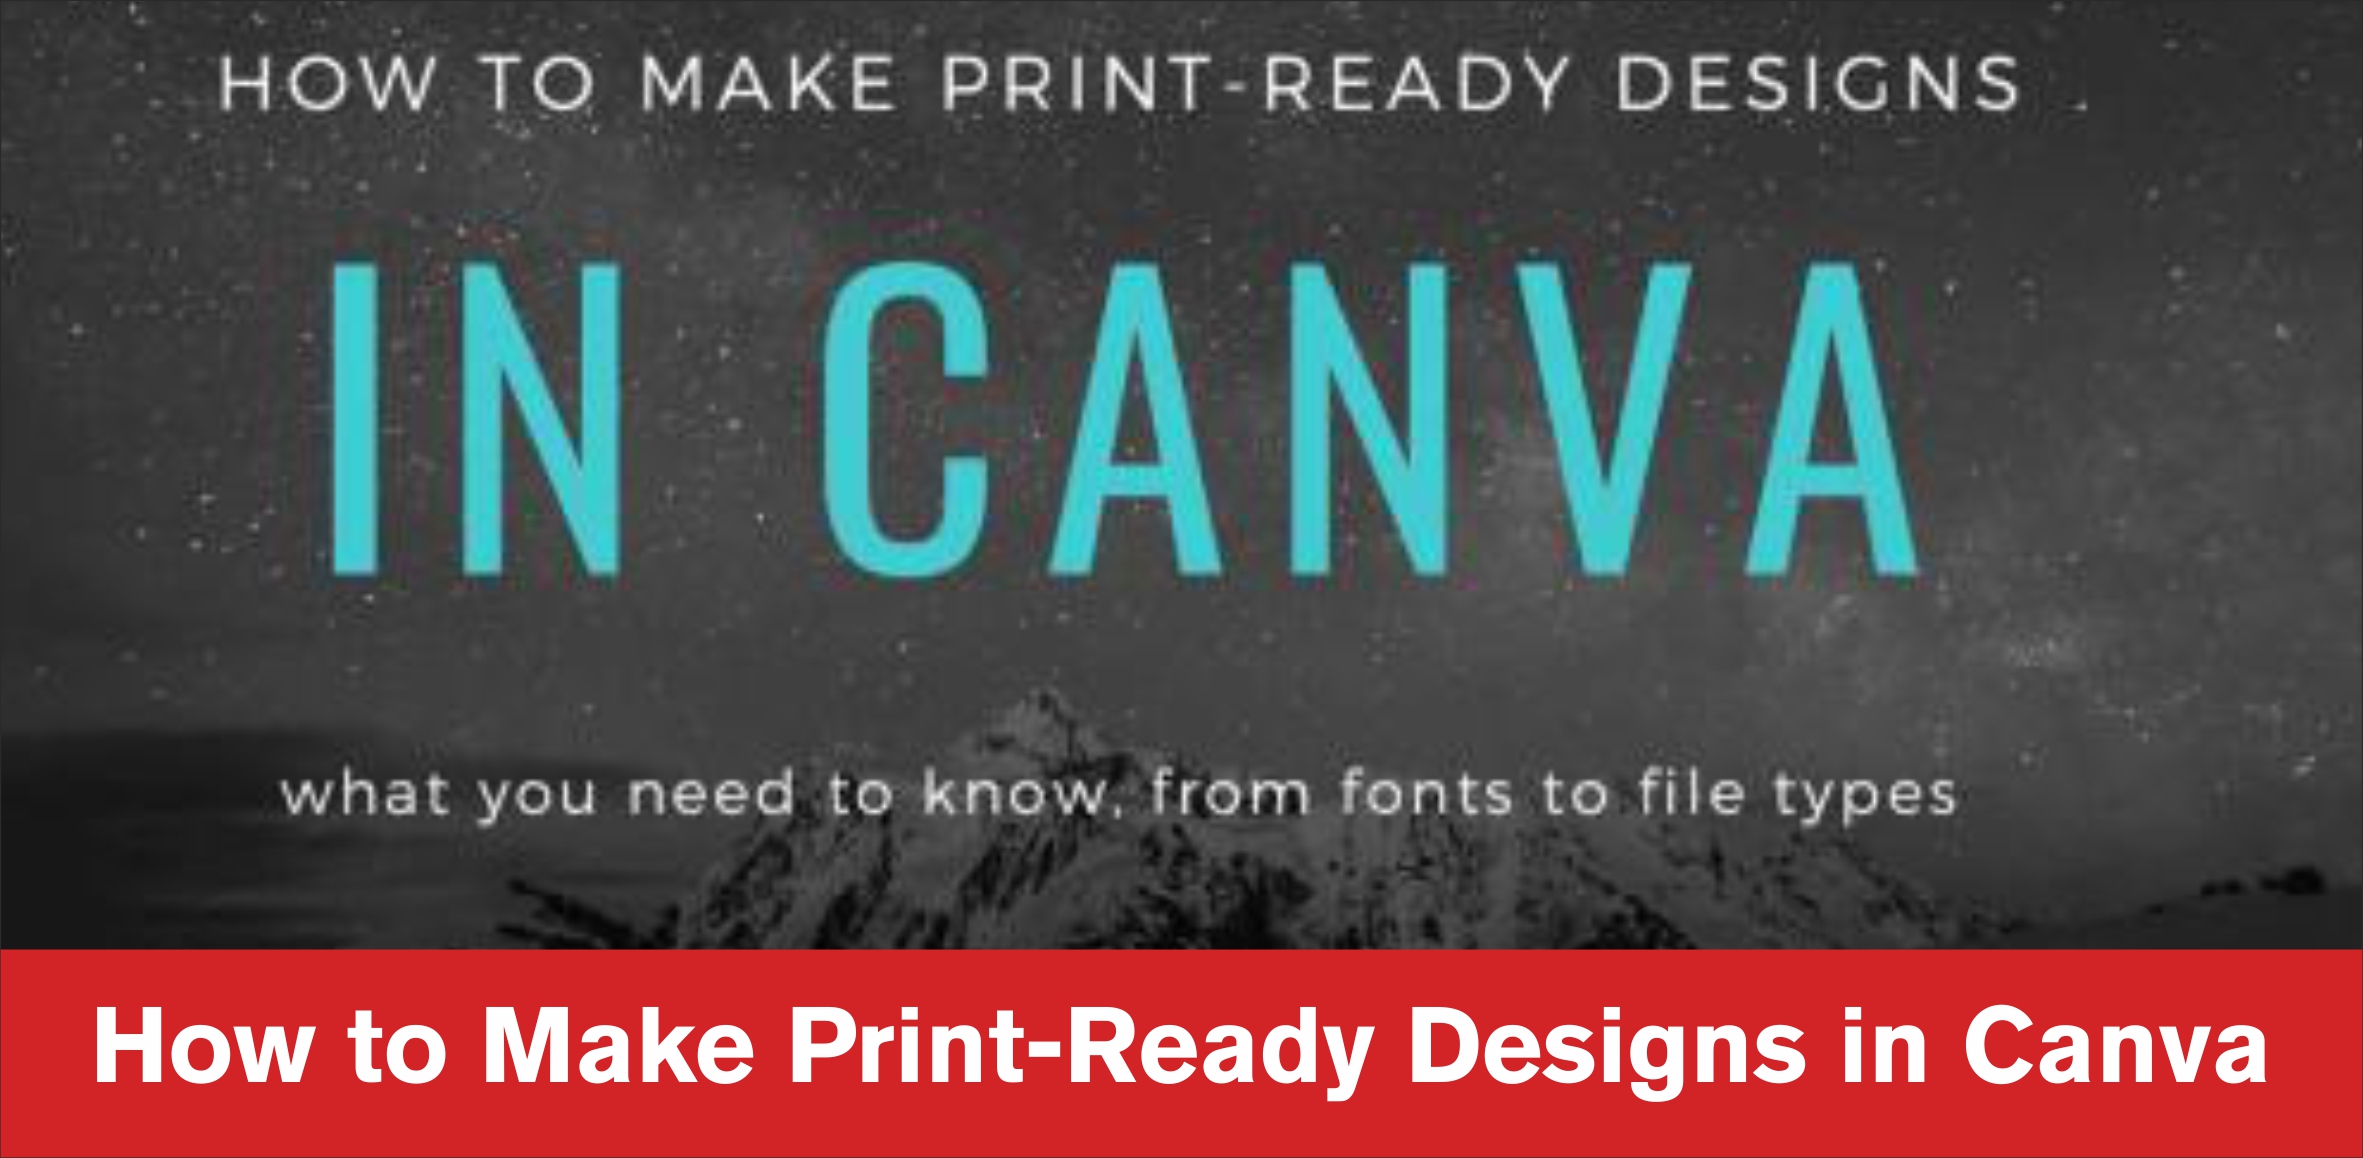 How to Make Print-Ready Designs in Canva